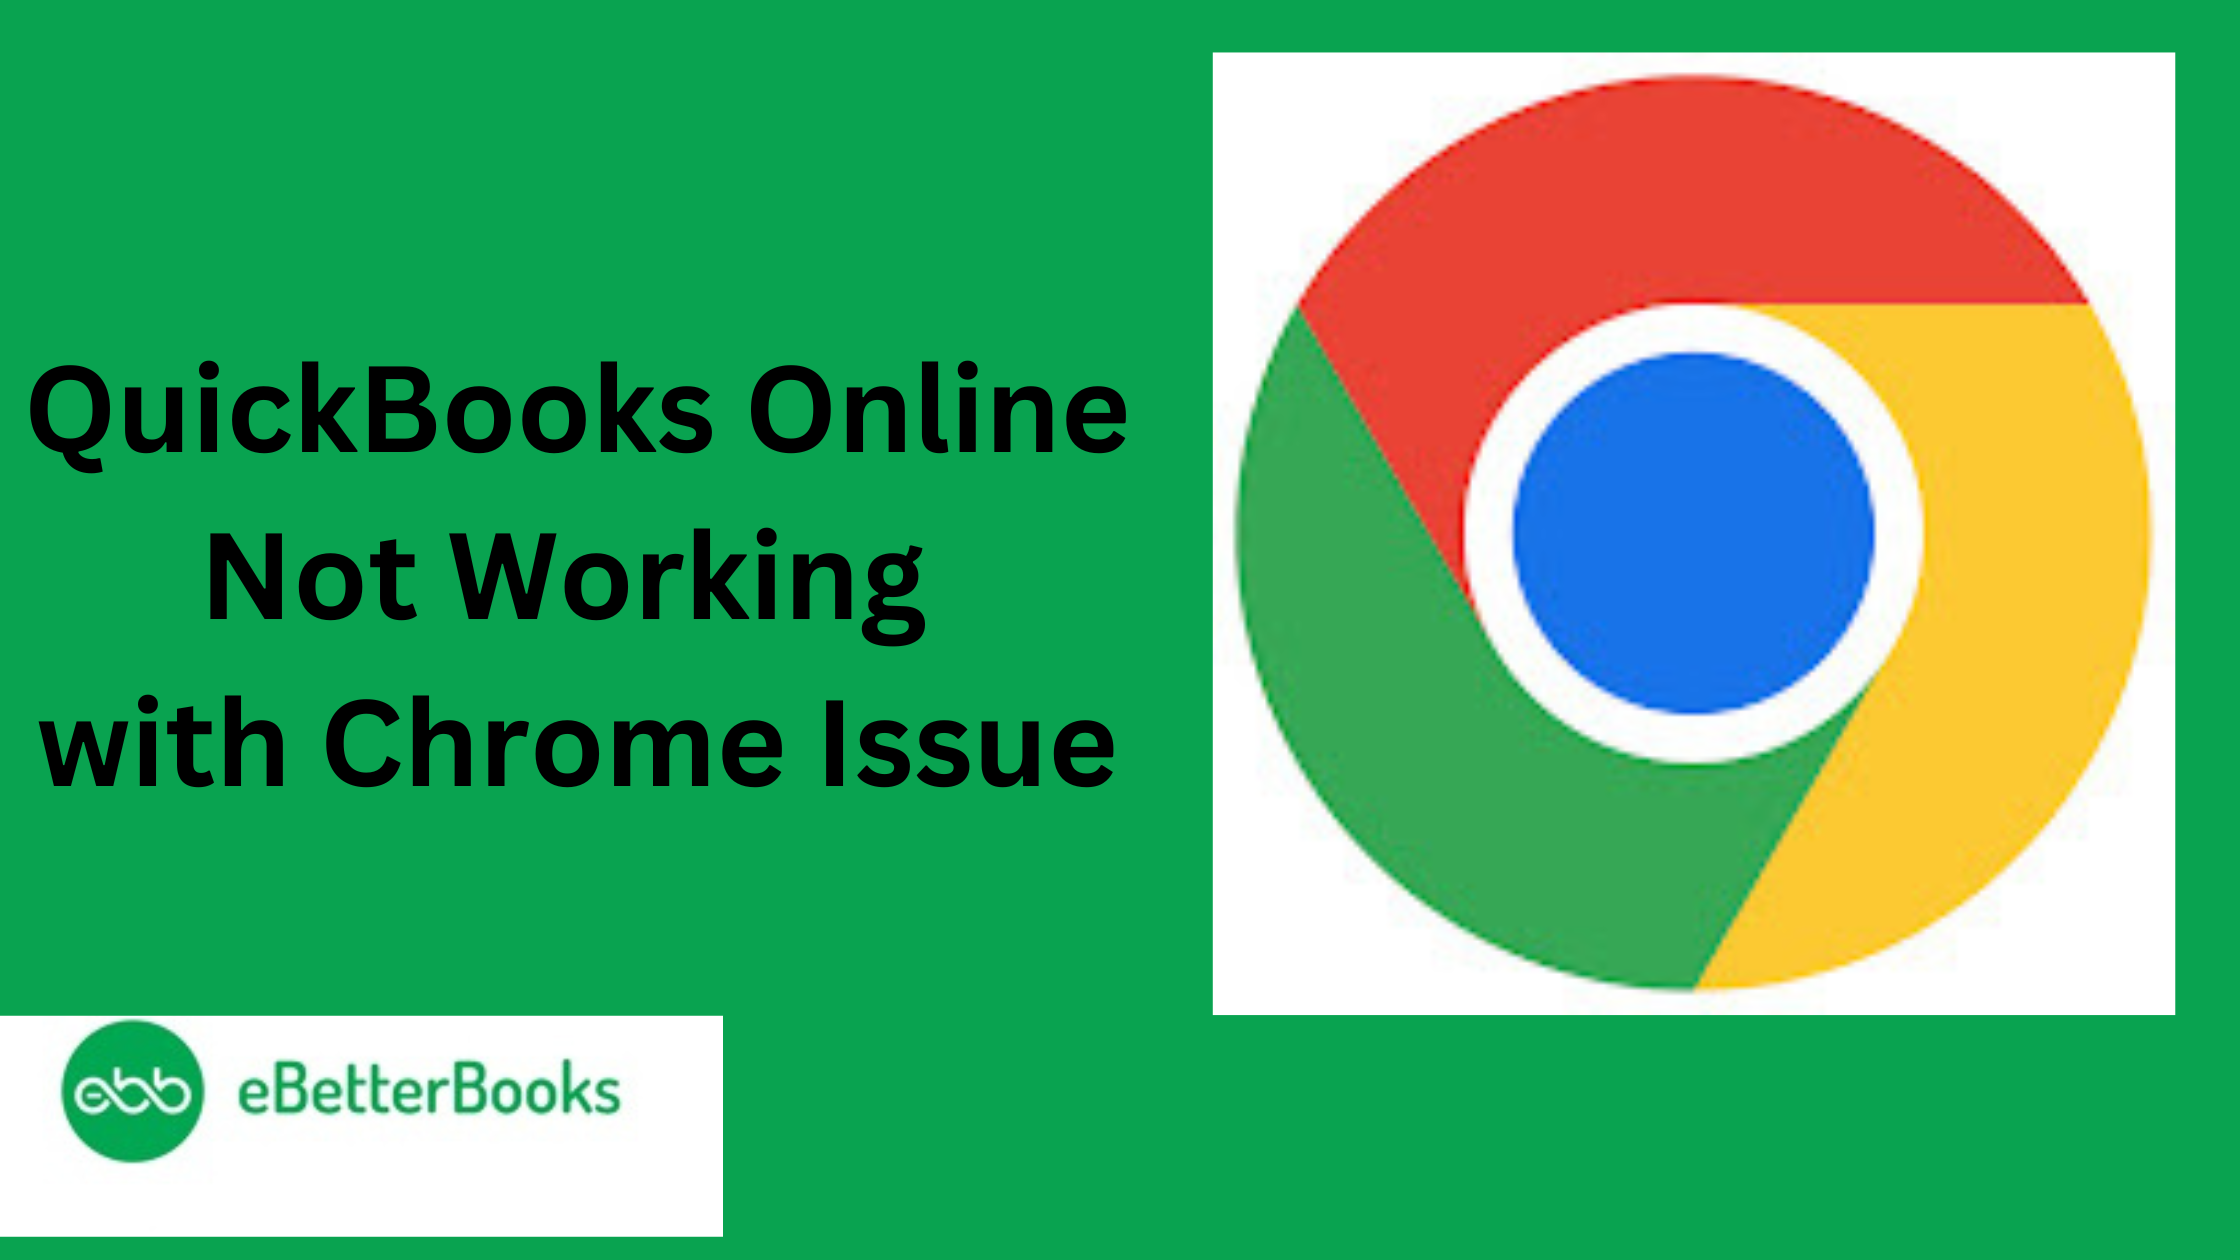 QB Online Not Working with Chrome Issue